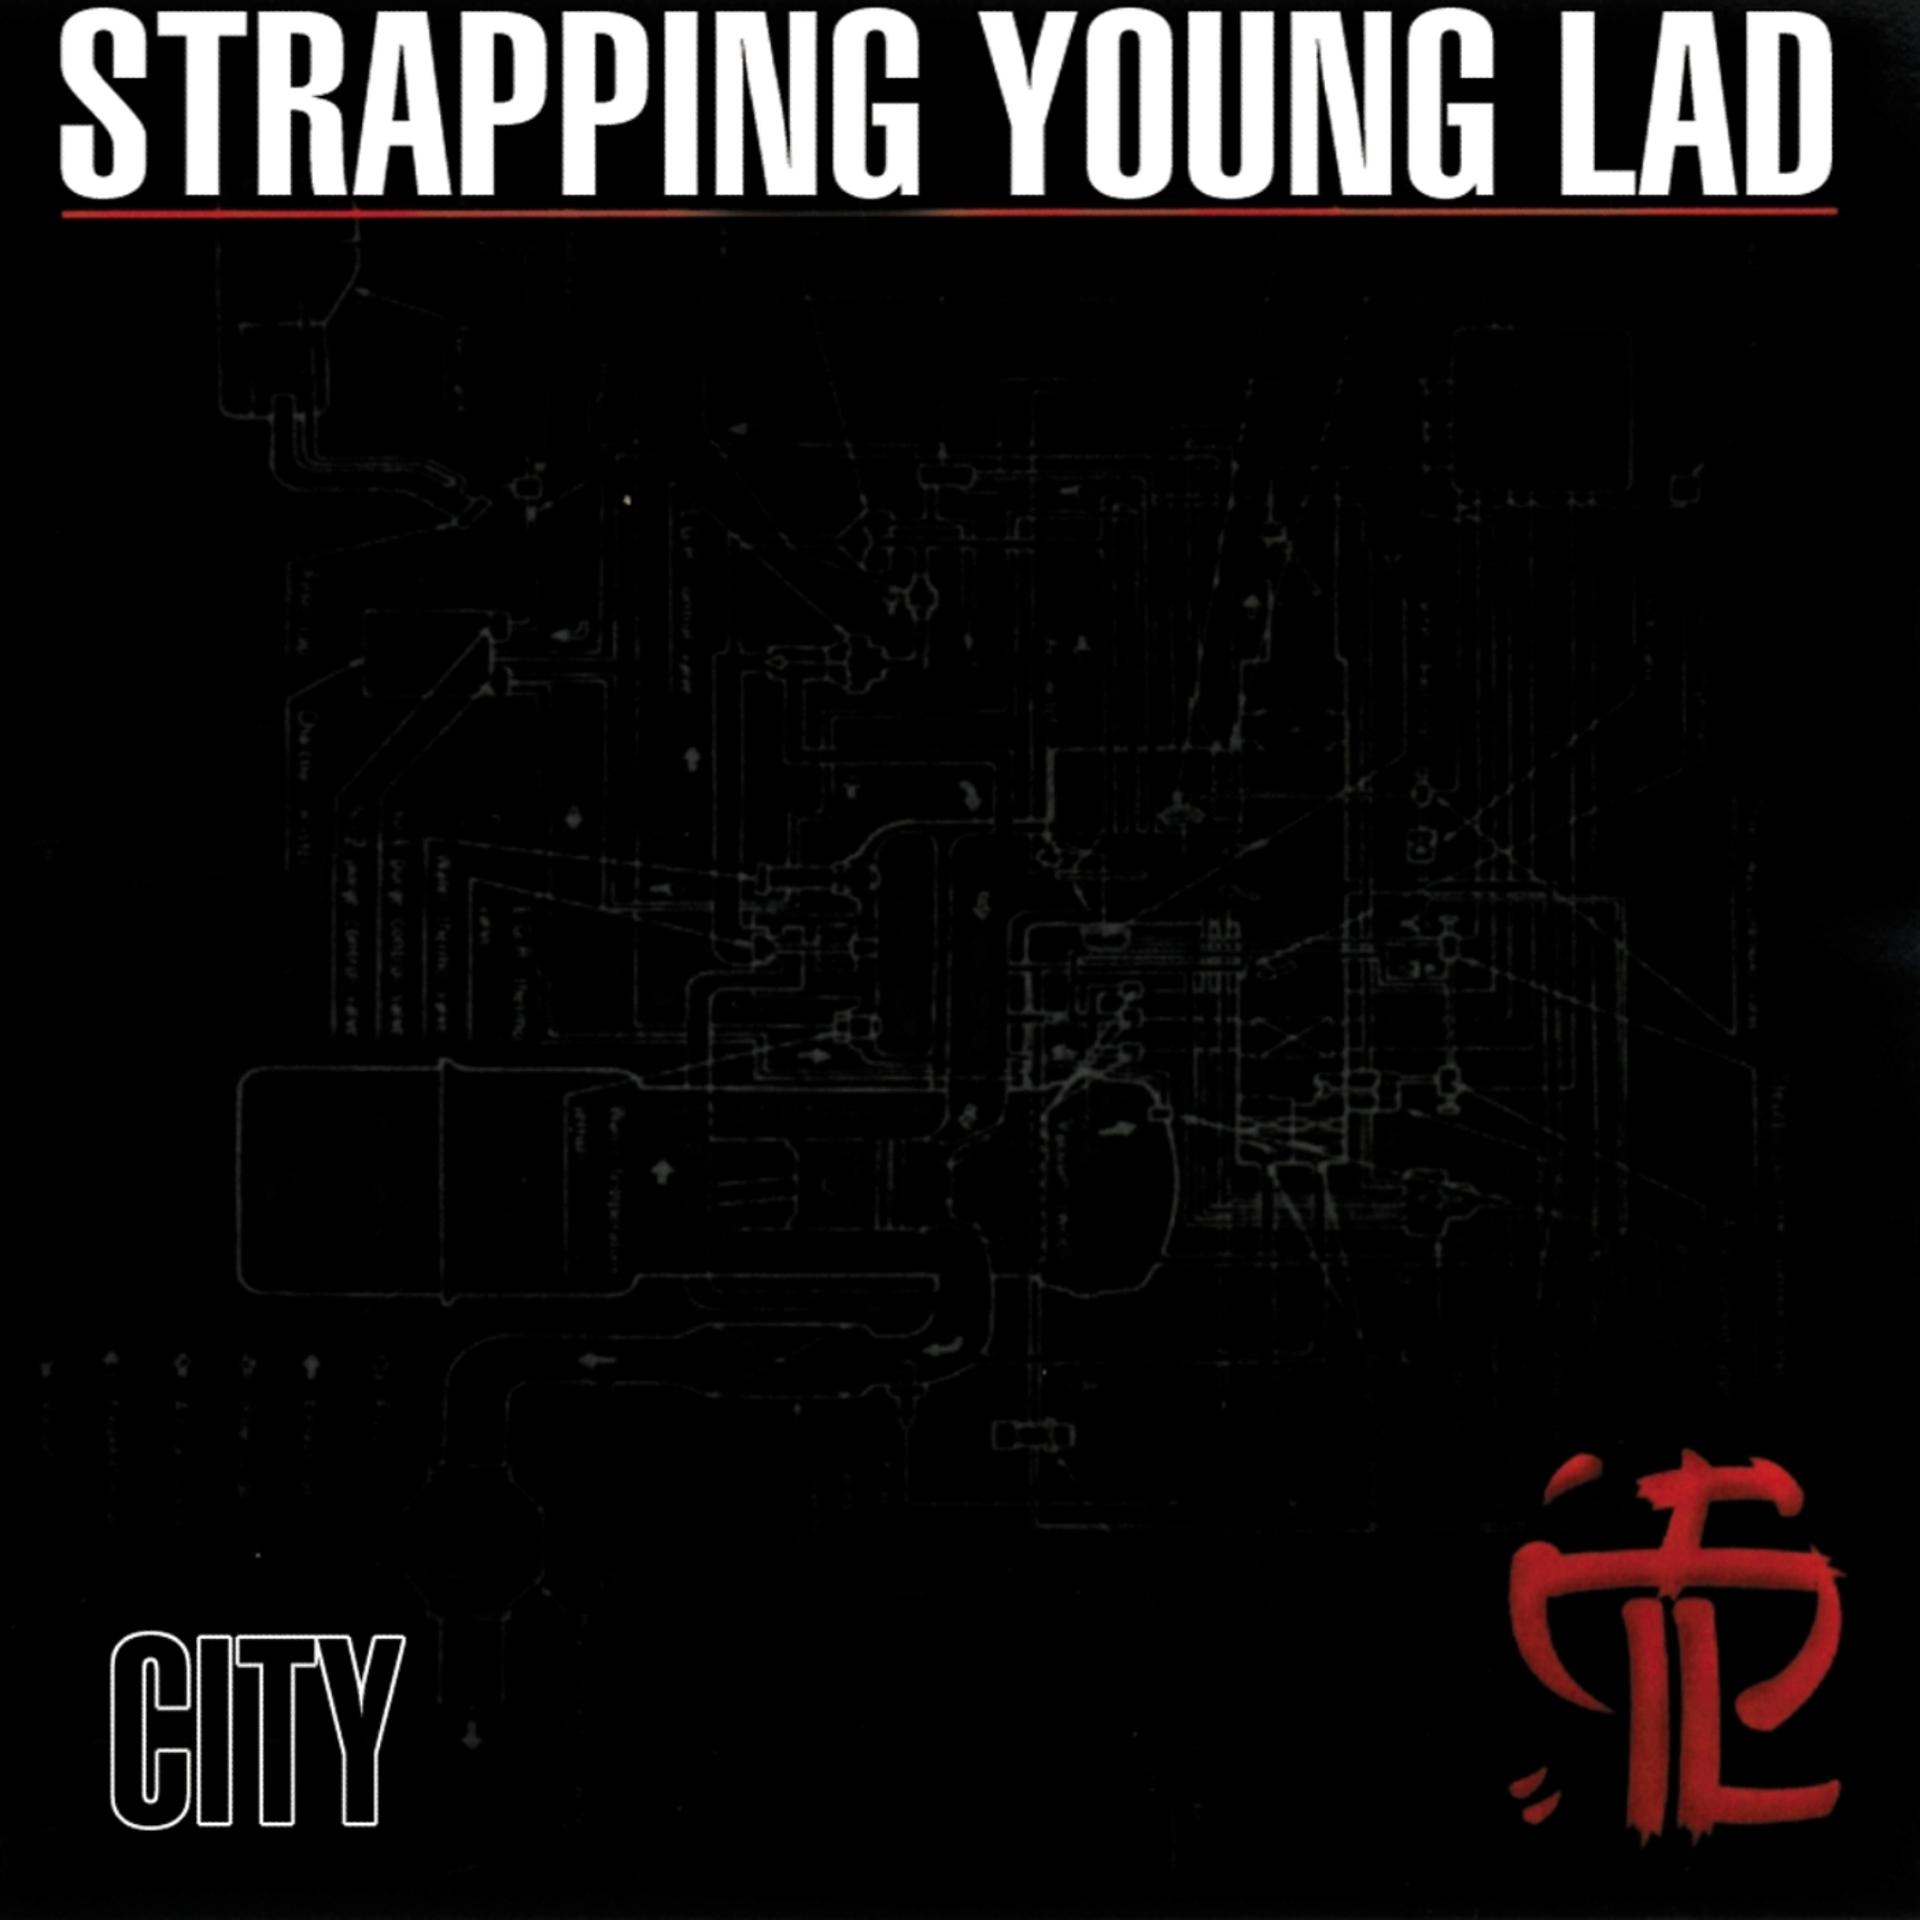 Strapping young. Strapping young lad City. Strapping young lad logo. Strapping young lad Strapping young lad 2003. Strapping young lad album.